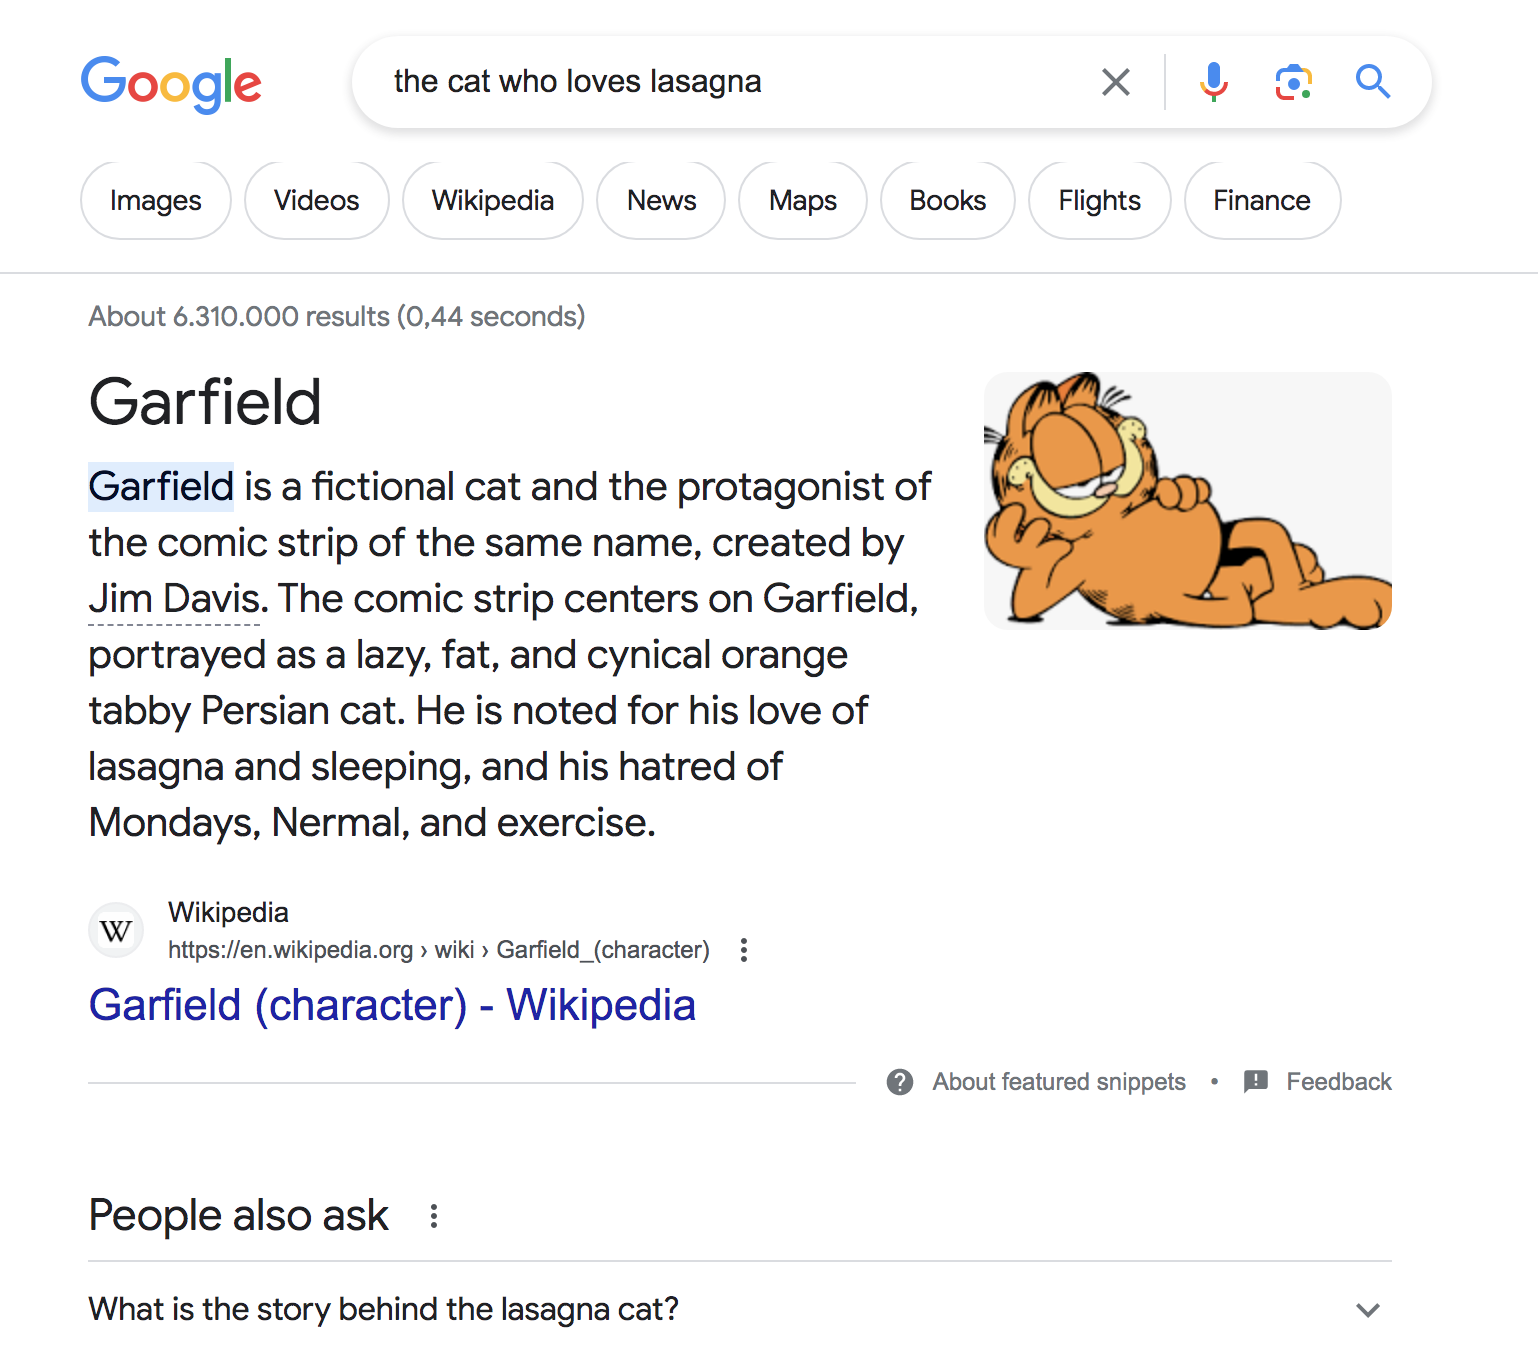 Garfield comes as Google's first result for "the cat who loves lasagna" query